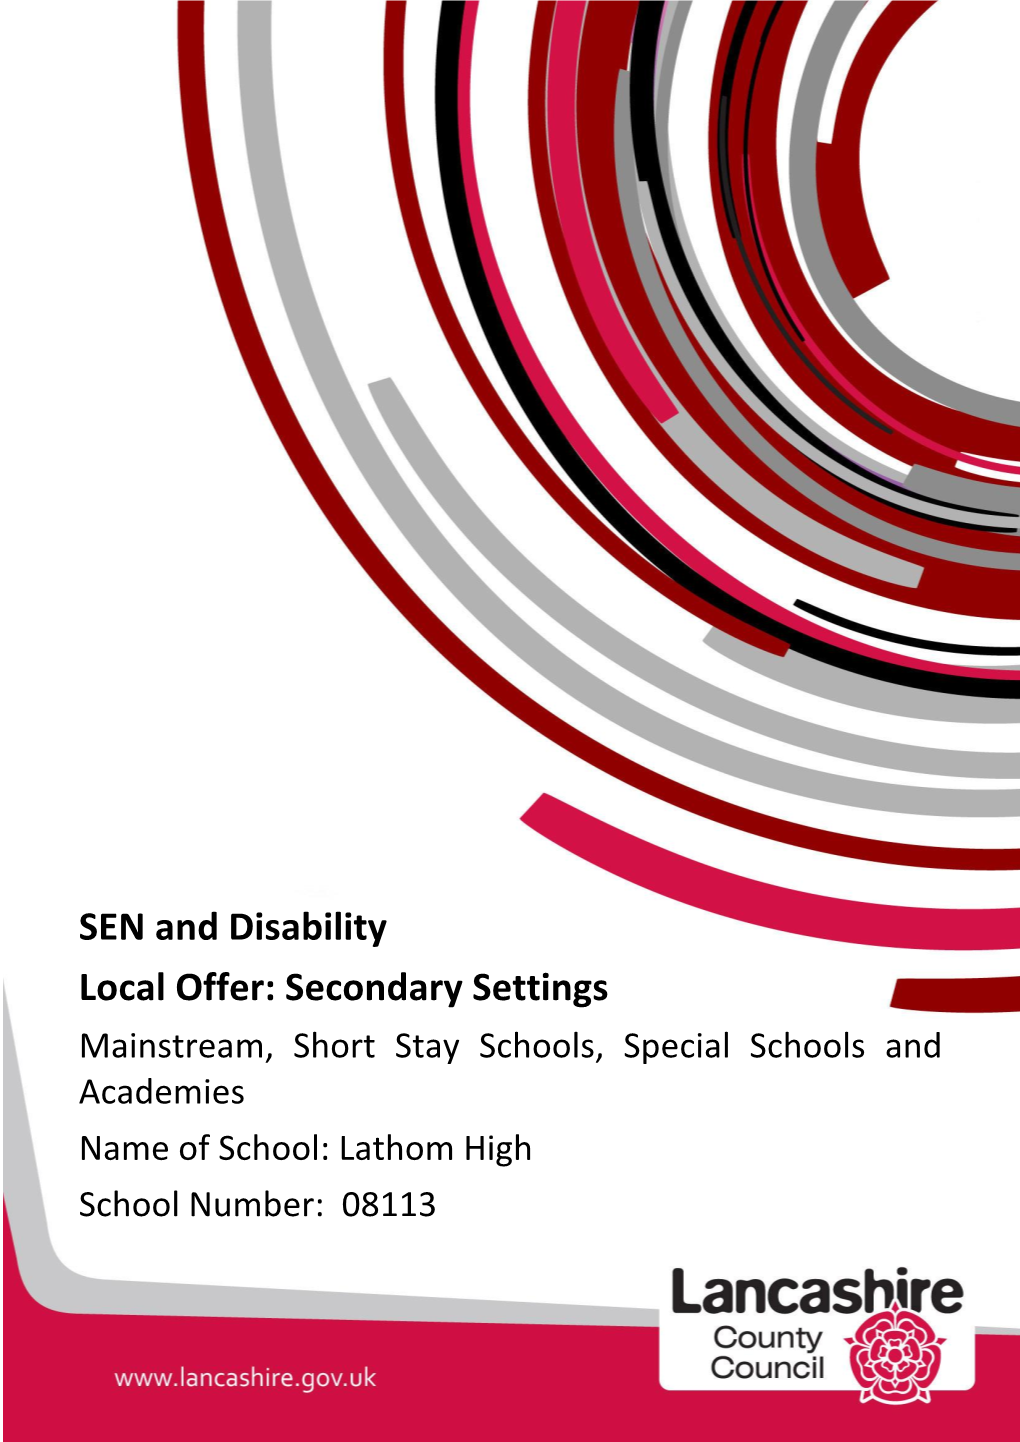 SEN and Disability Local Offer: Secondary Settings Mainstream, Short Stay Schools, Special Schools and Academies Name of School: Lathom High School Number: 08113